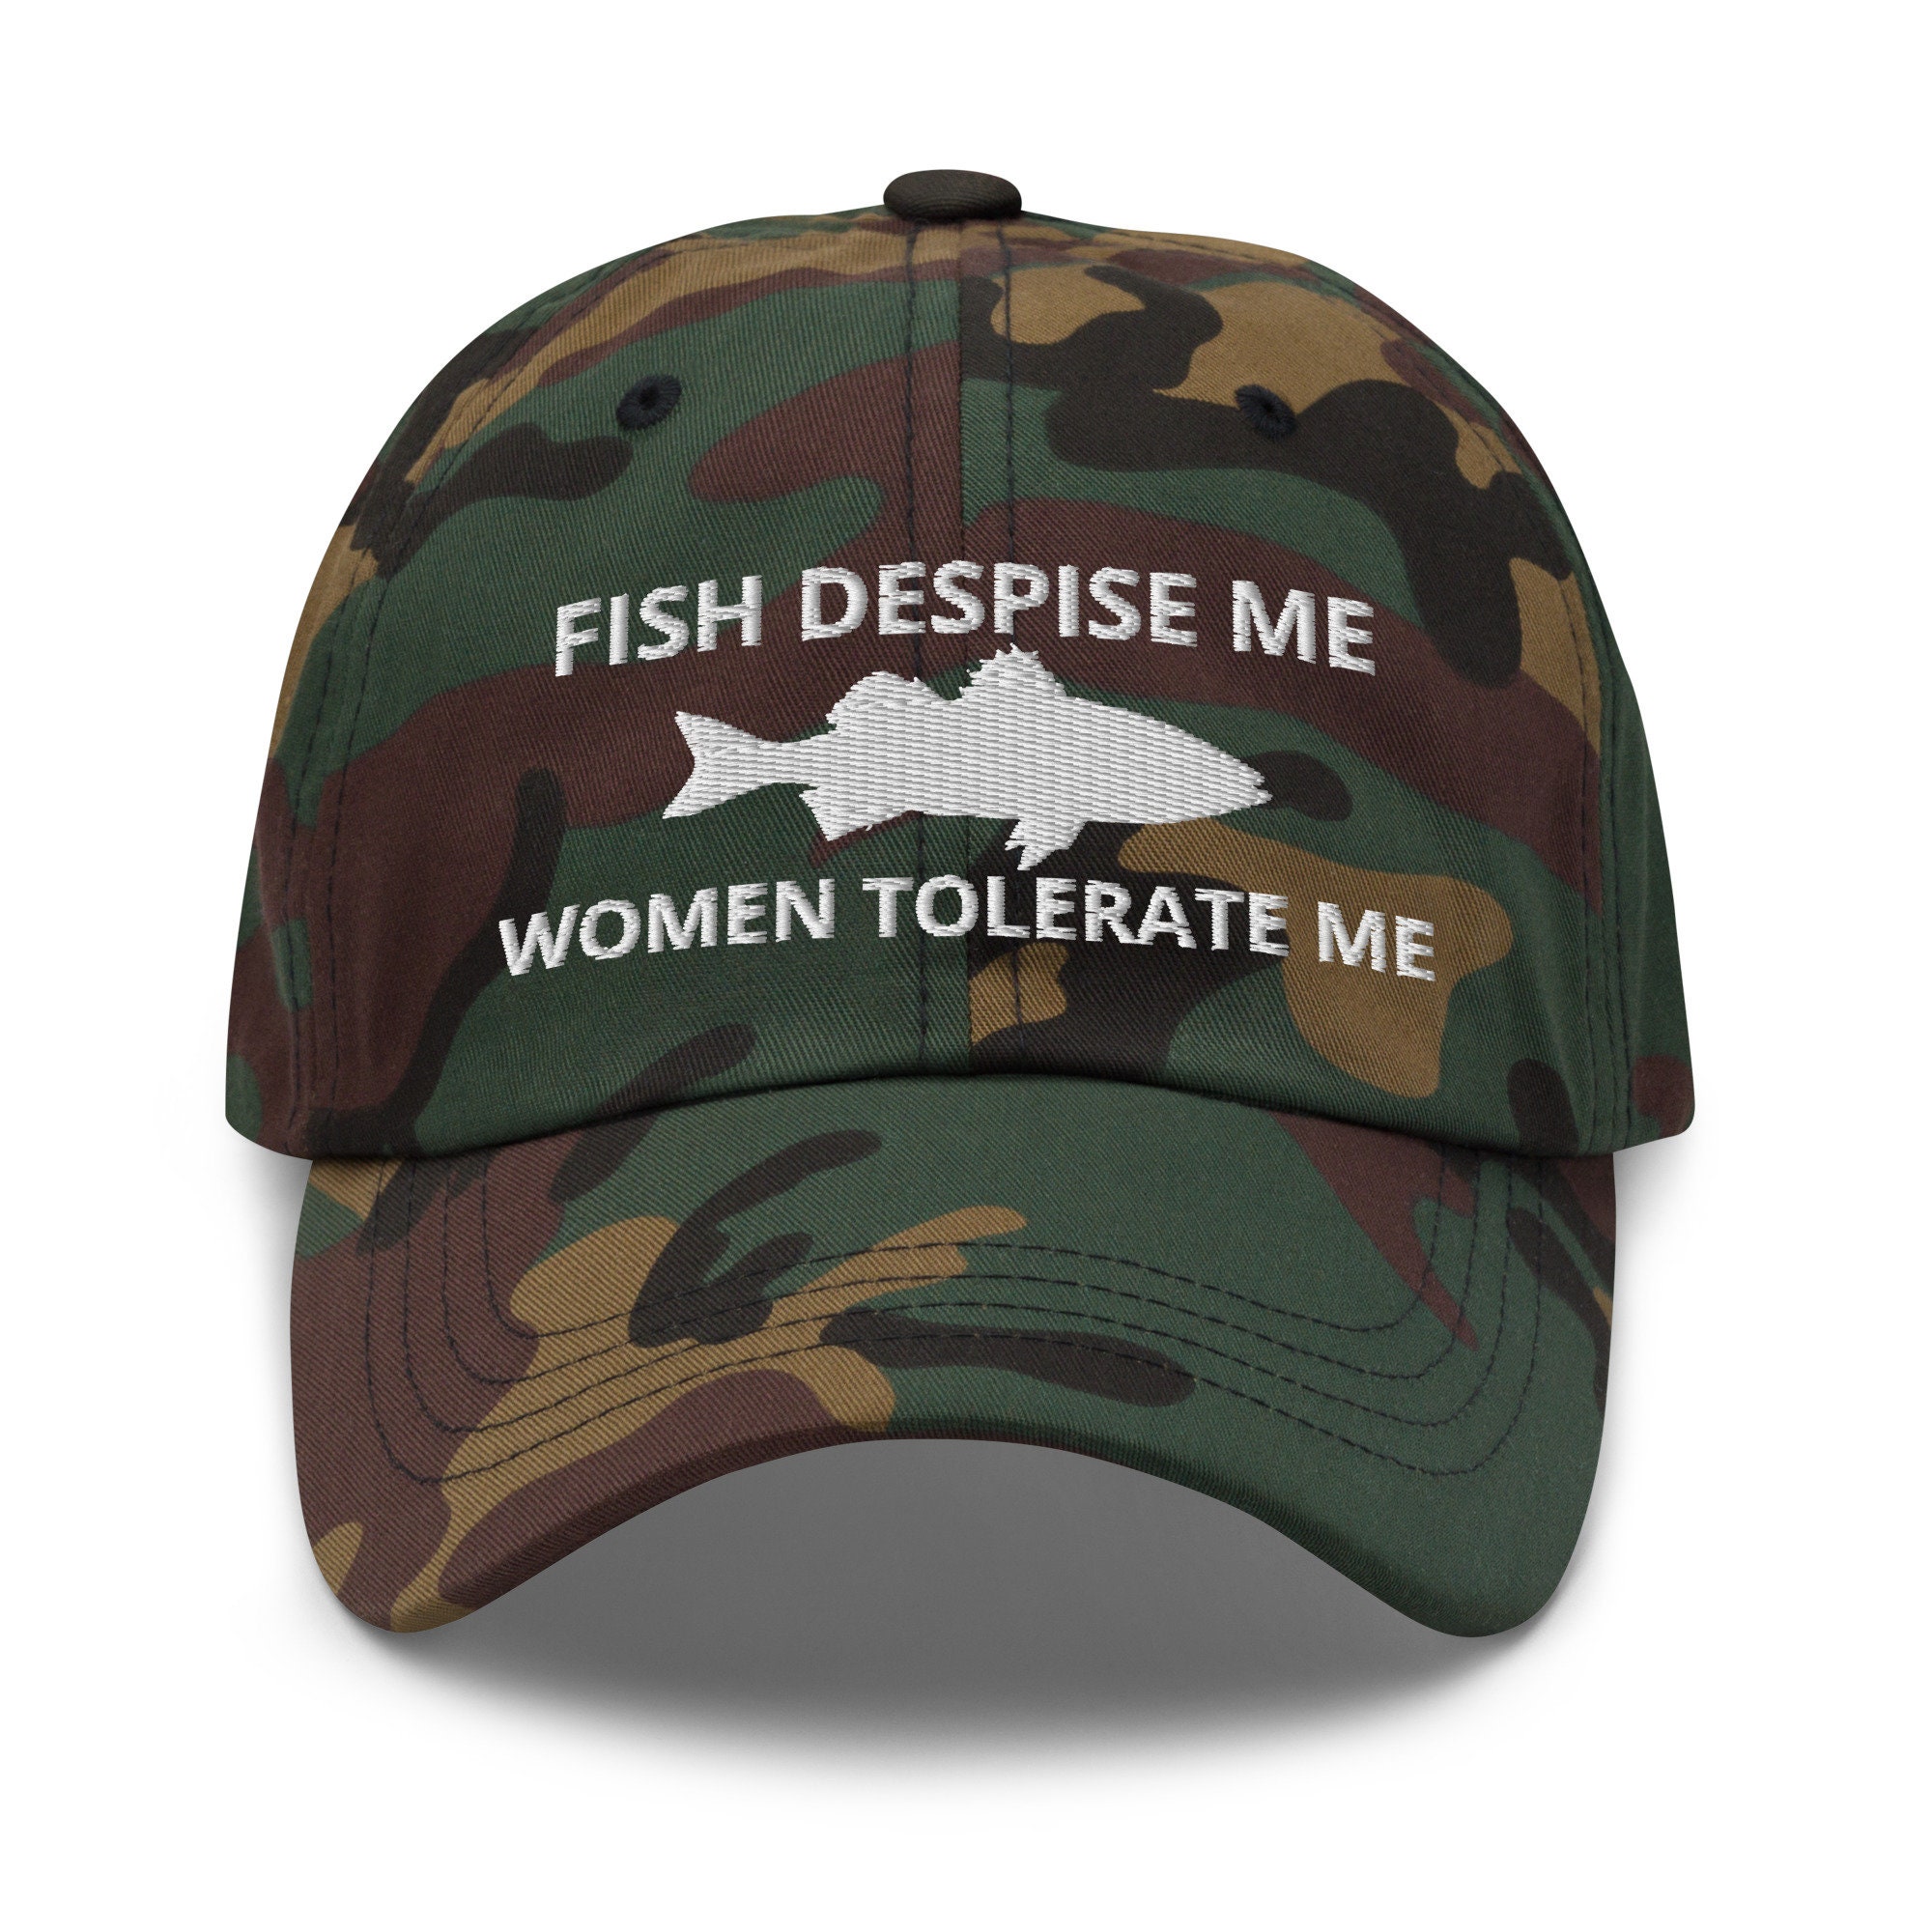 Fish Despise Me - Women Tolerate Me - Embroidered Classic Baseball Hat Gift for Fishing Lovers, Fishing Lovers Gift, Funny Dad Hat Cap